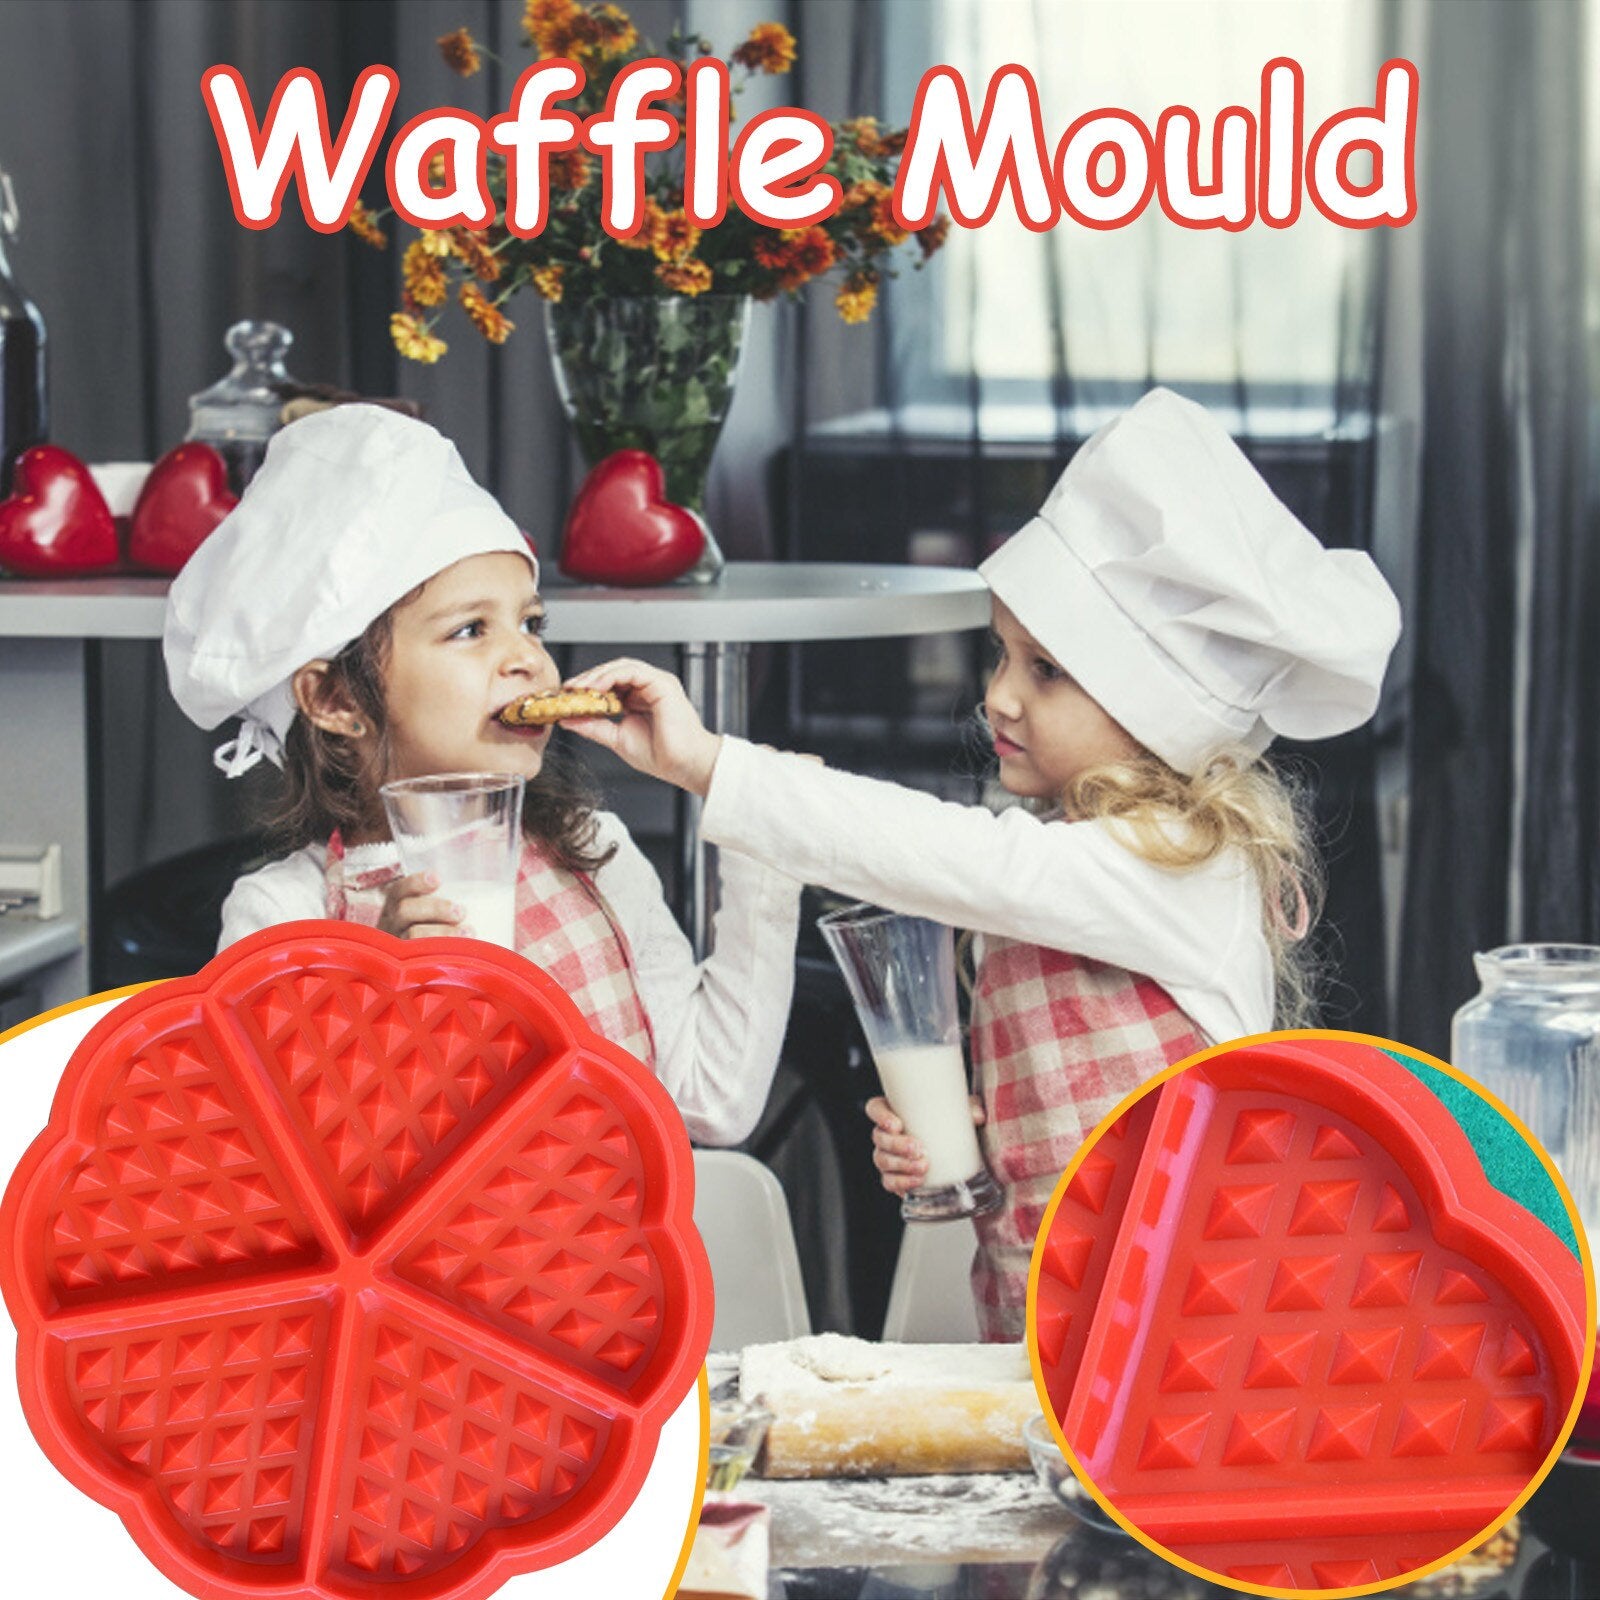 ZAAWAFFLE Premium Mold Maker With 5 Heart-shaped Simulation Molds